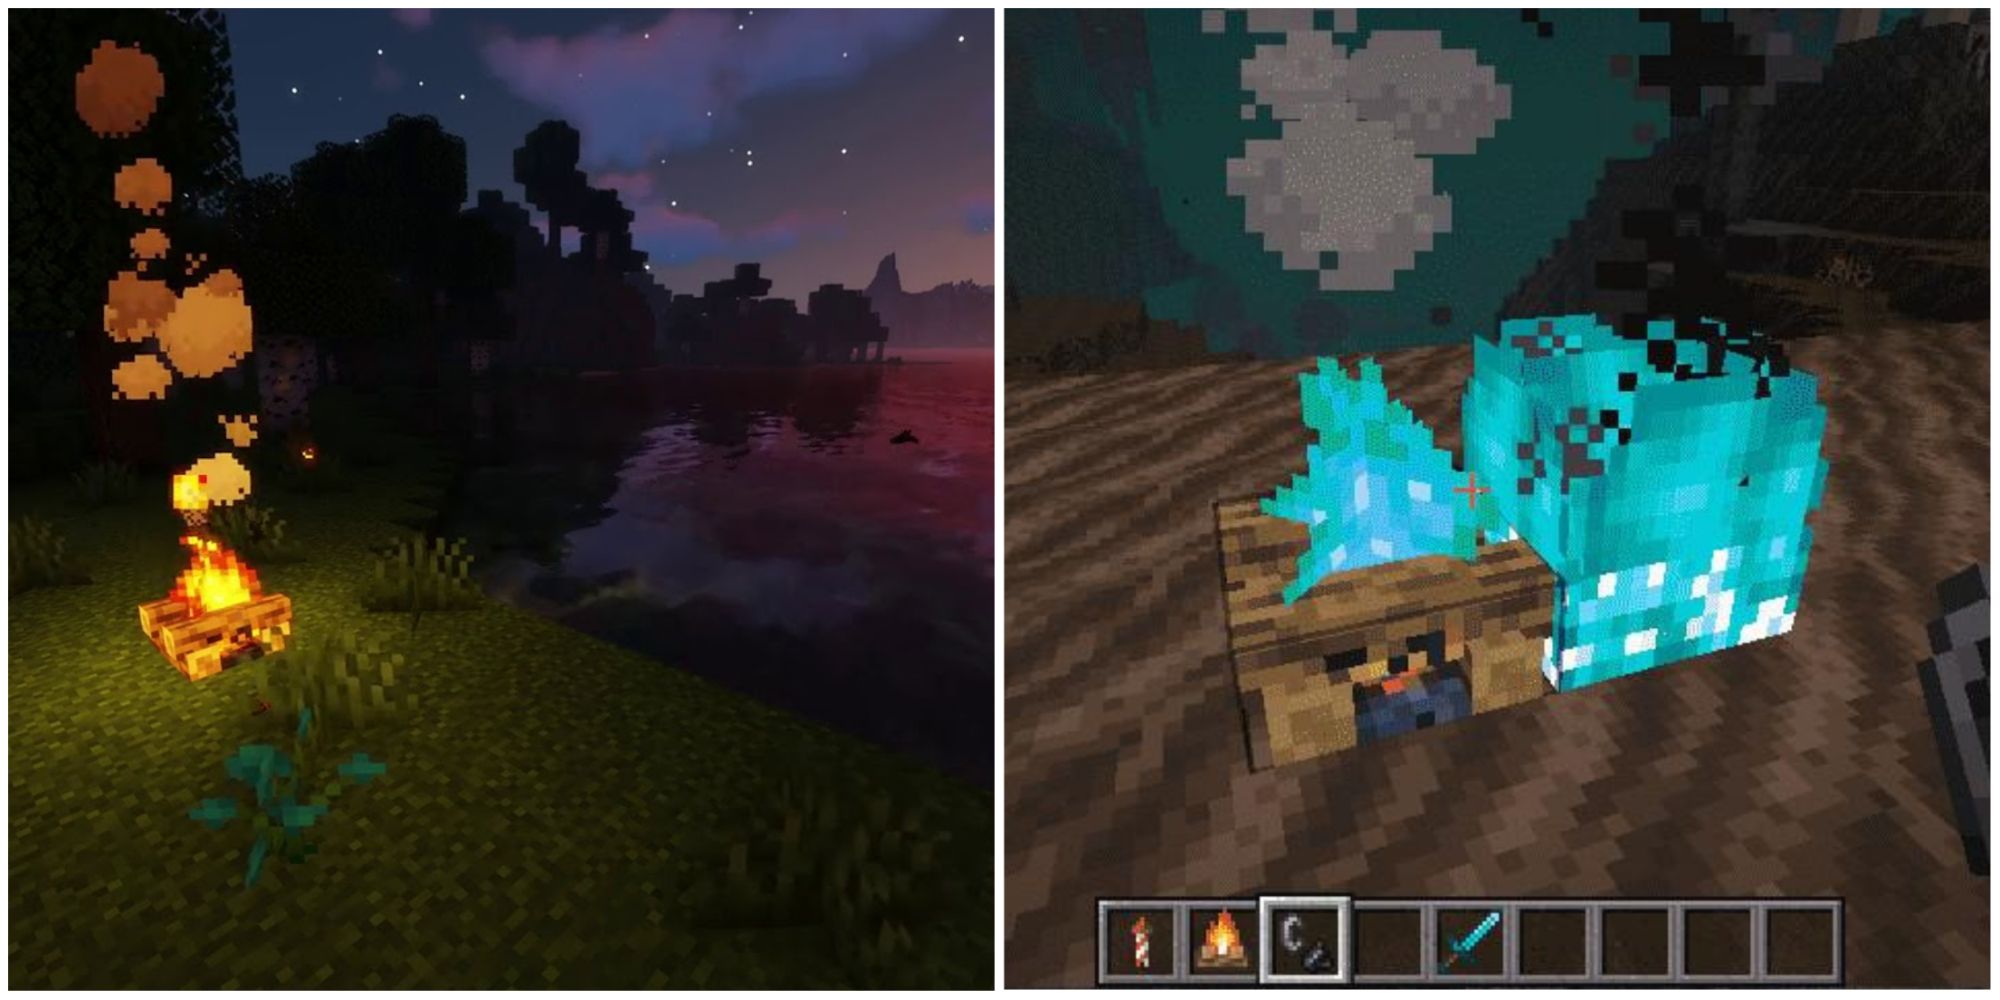 Minecraft Campfire In Overworld With Shaders And Soul Campfire In Nether Soul Sand Wastes 